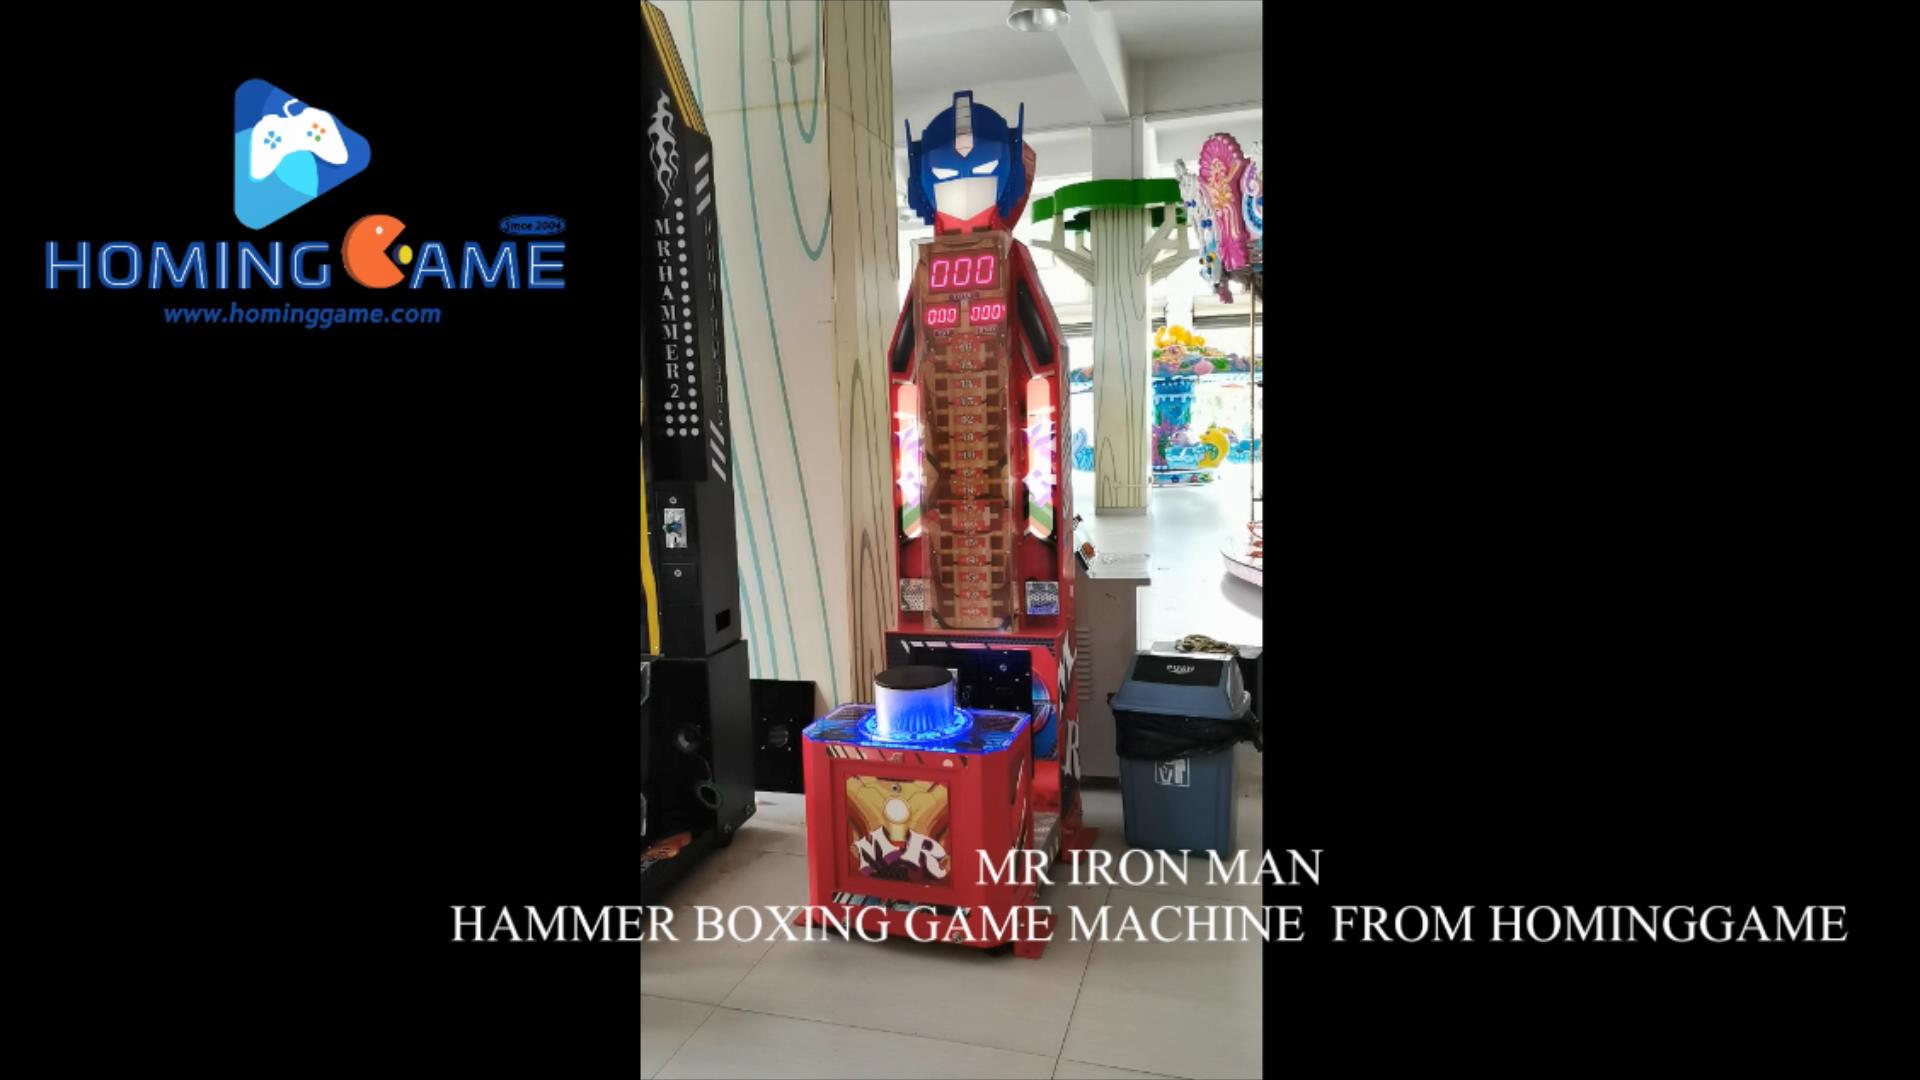 2020 HomingGame very funny competitive hammer arcade Mr IronMan Hammer arcade boxing game machine(Order Call Whatsapp:+8618688409495),mr ironman boxing game machine,mr hammer 2 arcade game machine,mr hammer 2 boxing arcade game machine,mr hammer 2 amusement boxing arcade game machine,mr hammer 2 king of hammer arcade game machine,king of hammer arcade game mahcine,king of hammer,hammer arcade game,hammer boxing arcade game machine,hammer boxing game machine,coin operated mr hammer 2 boxing arcade game machine,coin operated king of hammer arcade game machine,game machine,arcade game machine,coin operated game machine,amusement park game equipment,amusement machine,entertainment game,family entertainment game machine,entertainment machine,indoor game machine,lottery game machine,redemption game machine,redemption game,arcade games,arcade game machine for sale,hominggame,www.gametube.hk,hammer machine,kids game equipment,kids lottery game machine,FEC game center game machine,FEC game,electrical kids game machine,children game machine,redemption ticket game machine